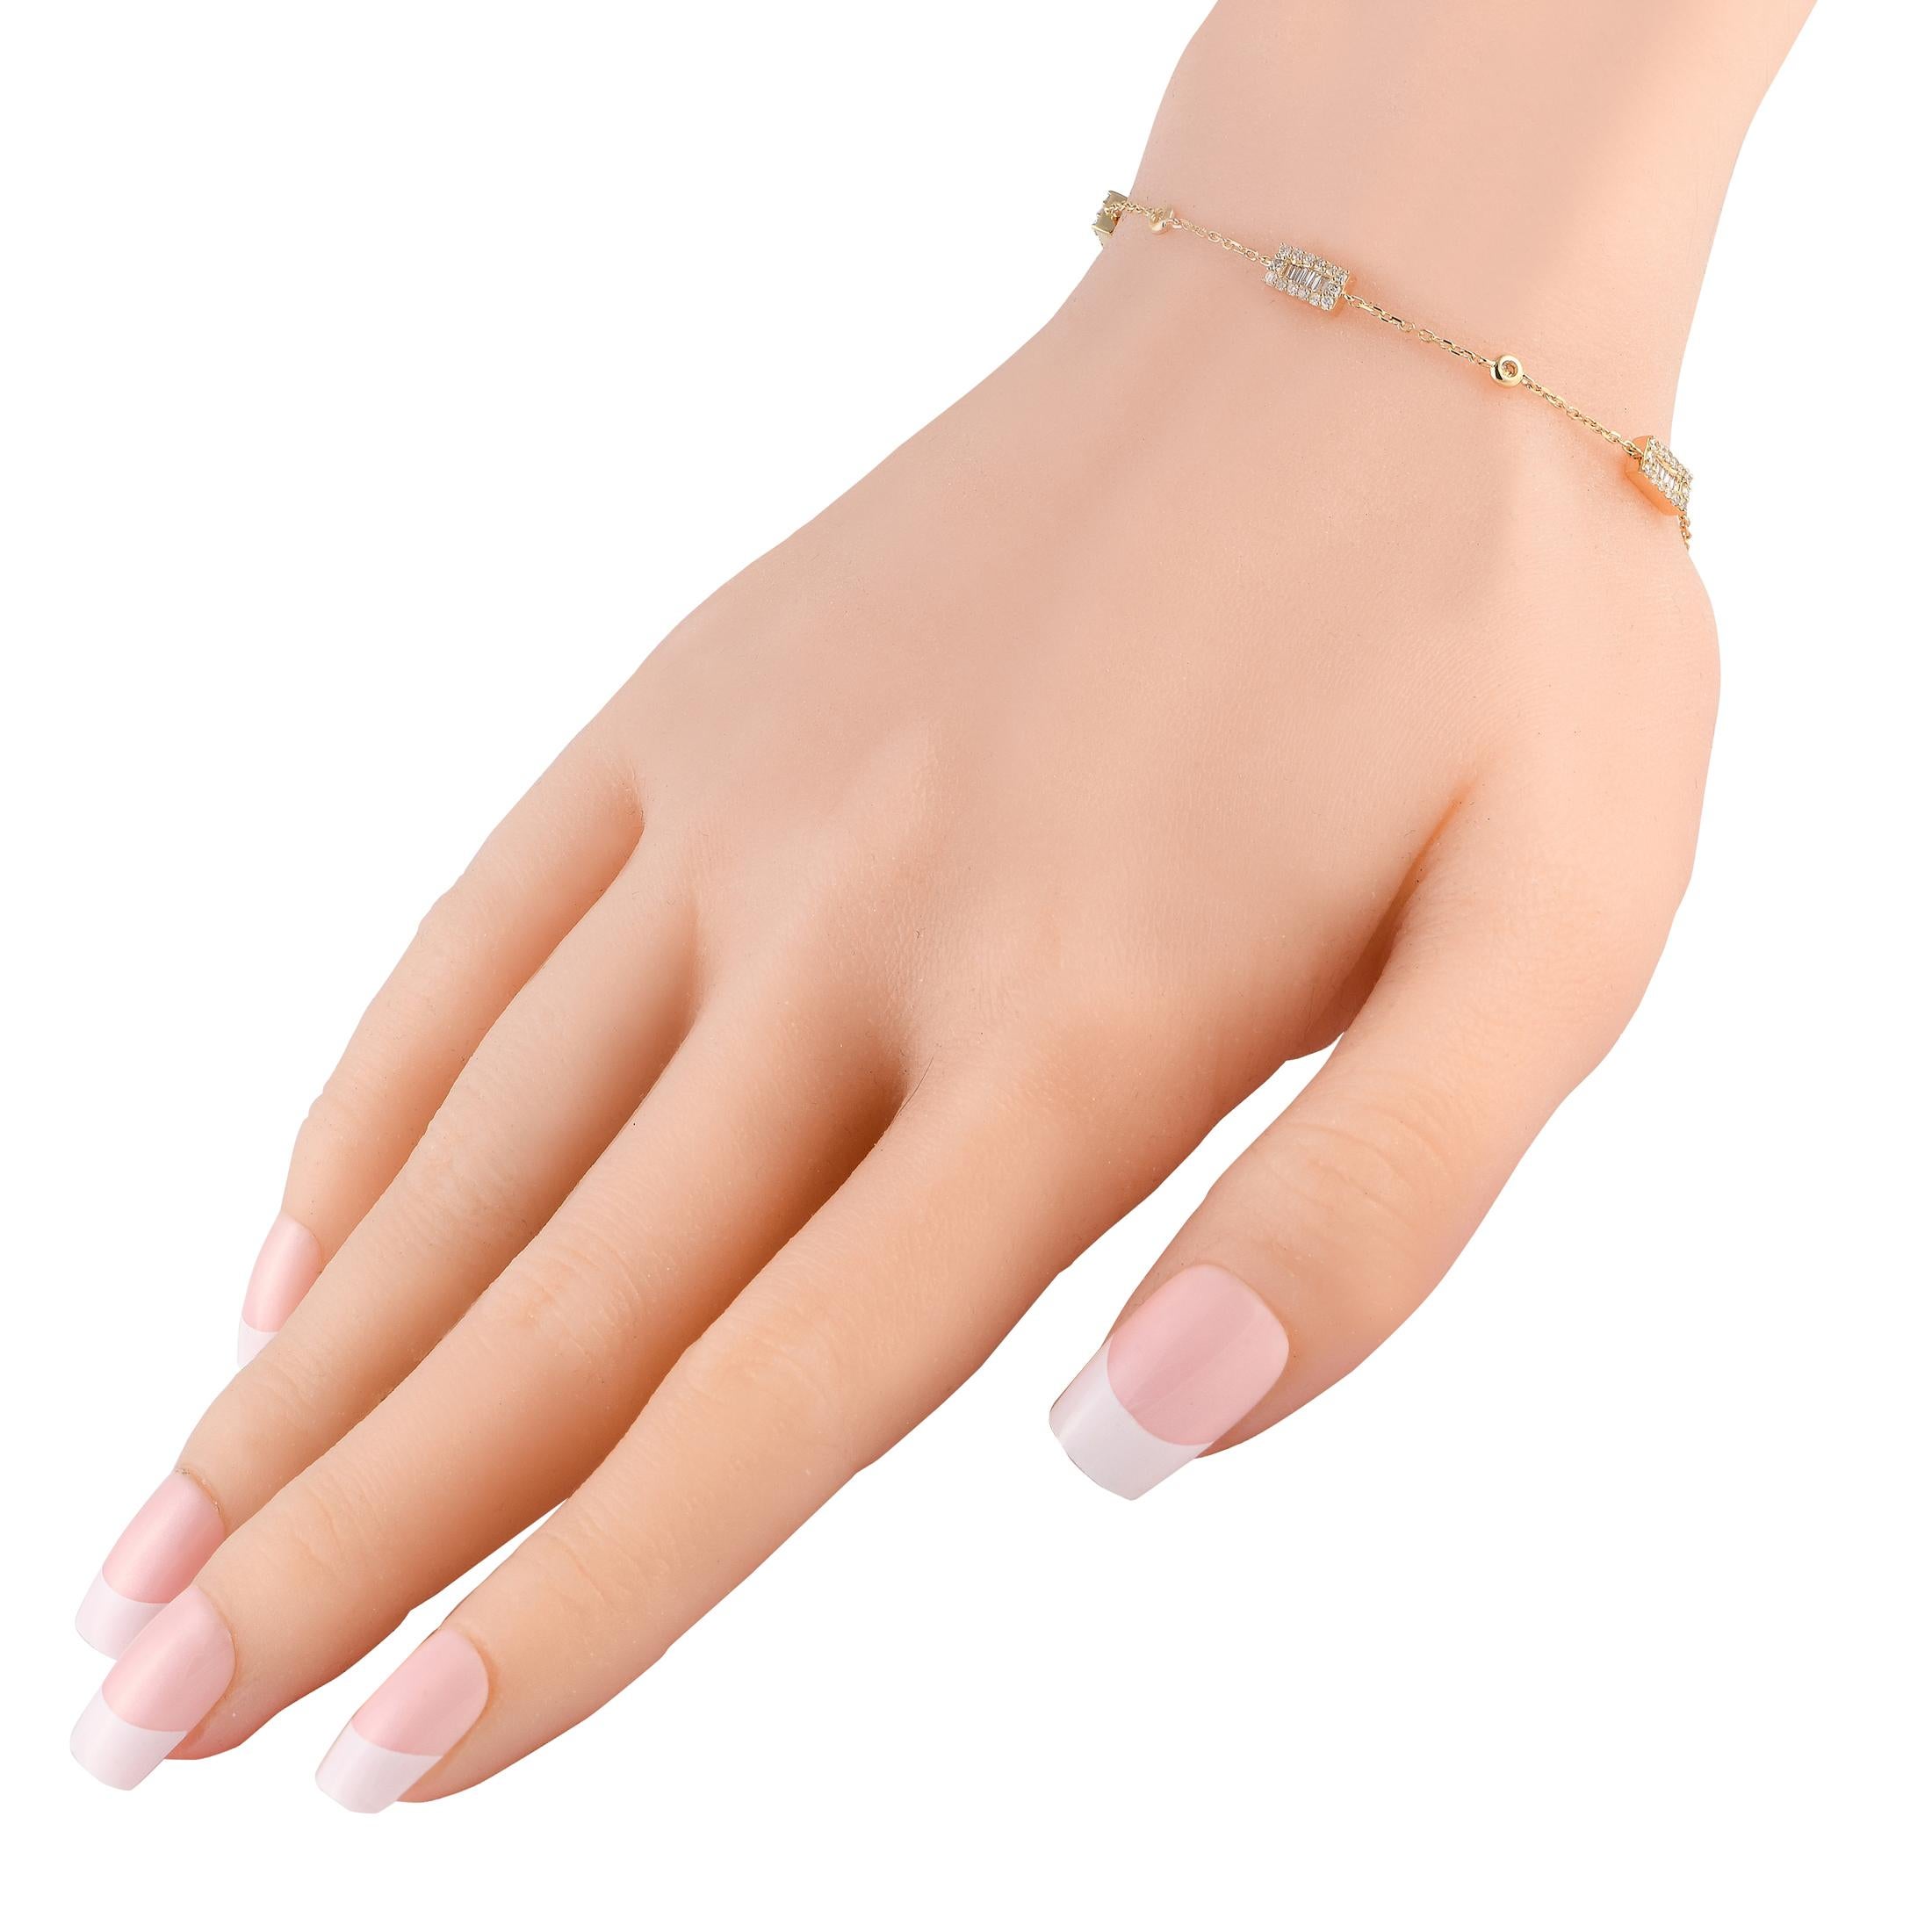 This bracelet is a simple stunner that looks good on its own or layered with other bracelets. It is crafted in 14K yellow gold and designed with an alternating pattern of bezel-set round diamonds and diamond clusters in a rectangular setting.This